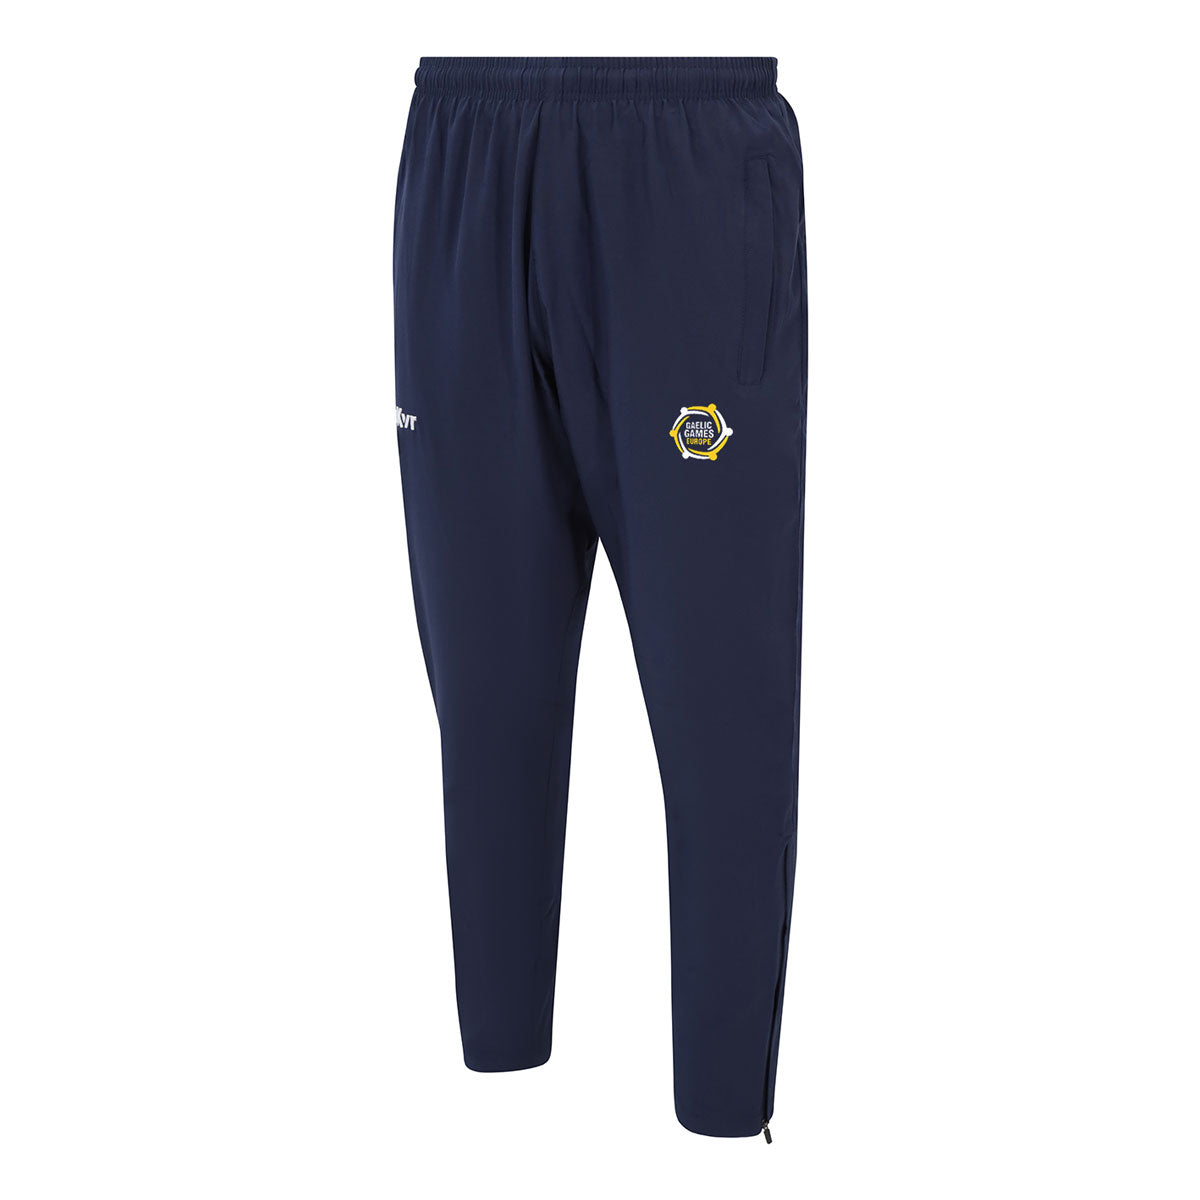 Mc Keever Gaelic Games Europe Core 22 Tapered Pants - Youth - Navy